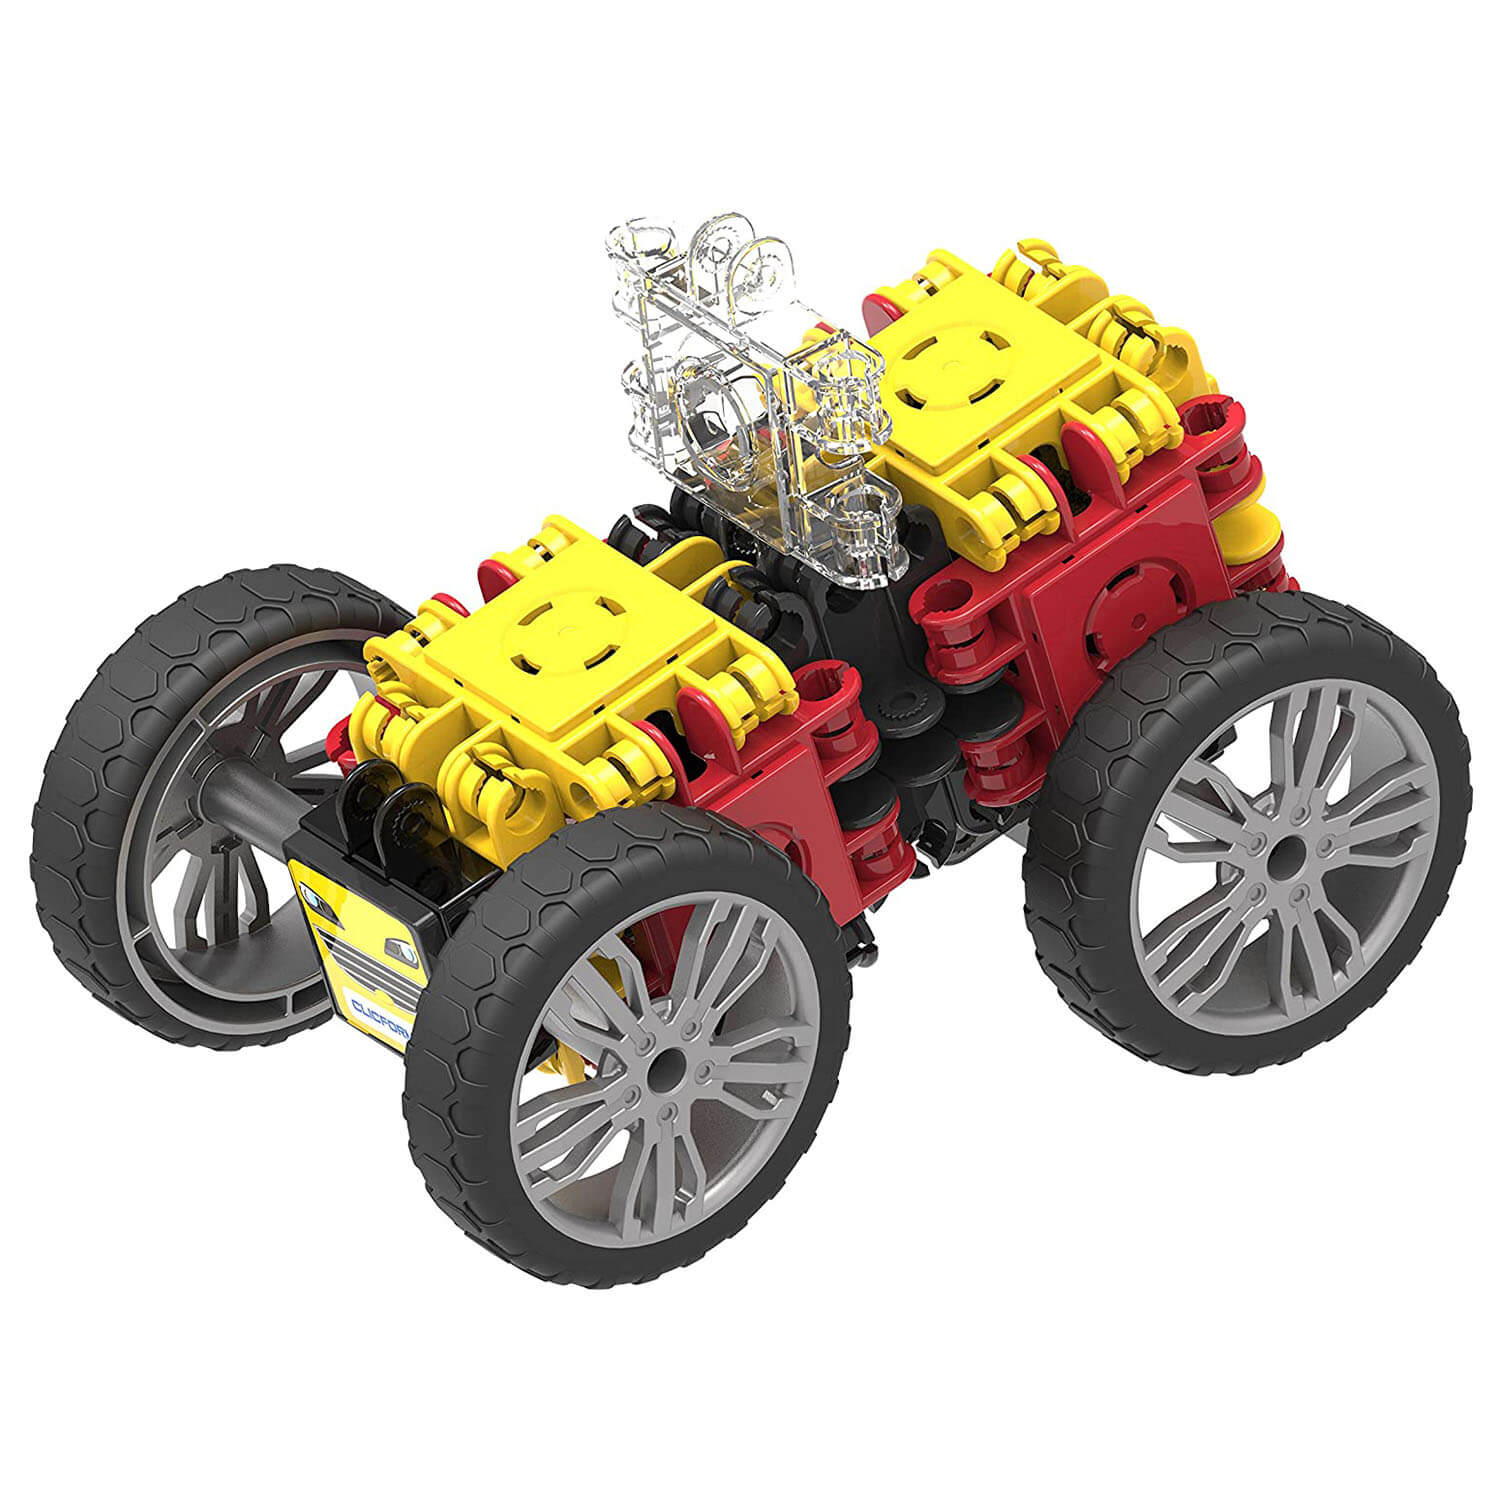 Front view of the Clickformers Speed Wheel Set 34 Piece.